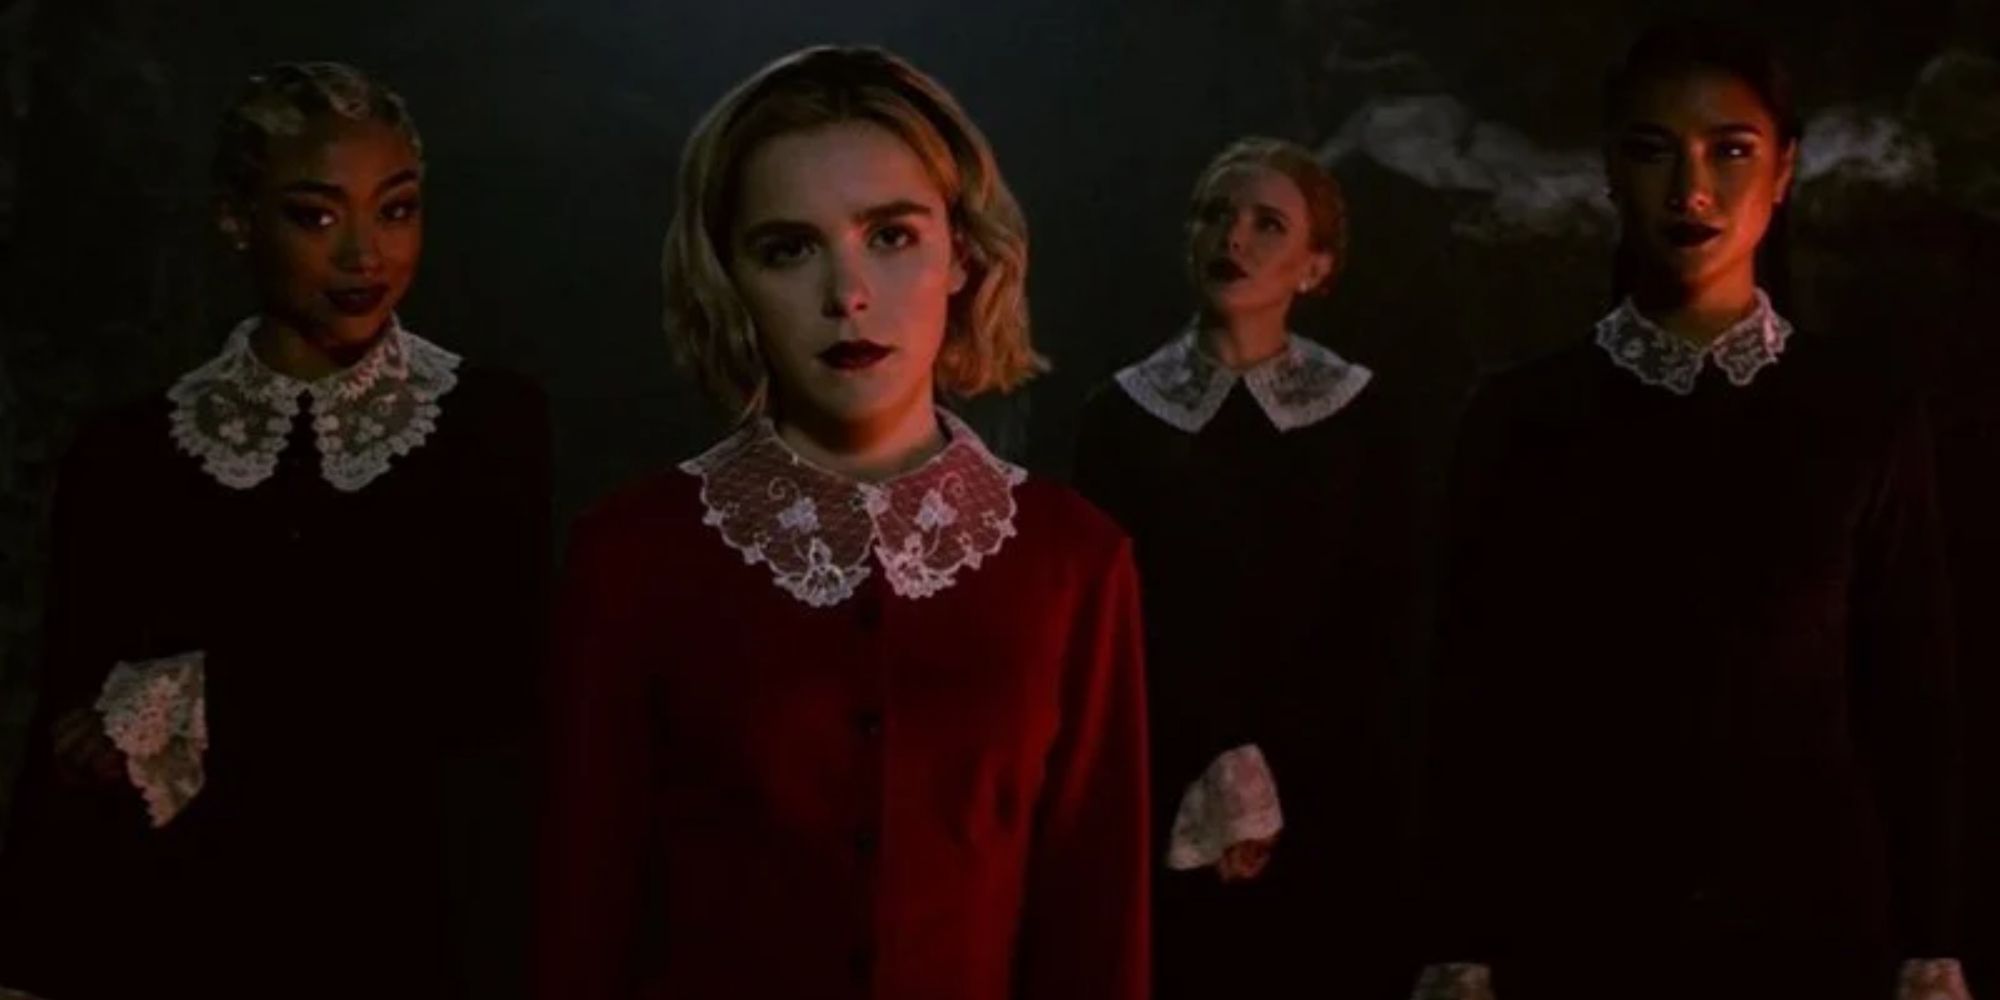 Sabrina Spellman at the centre staring forward with three other witches behind her